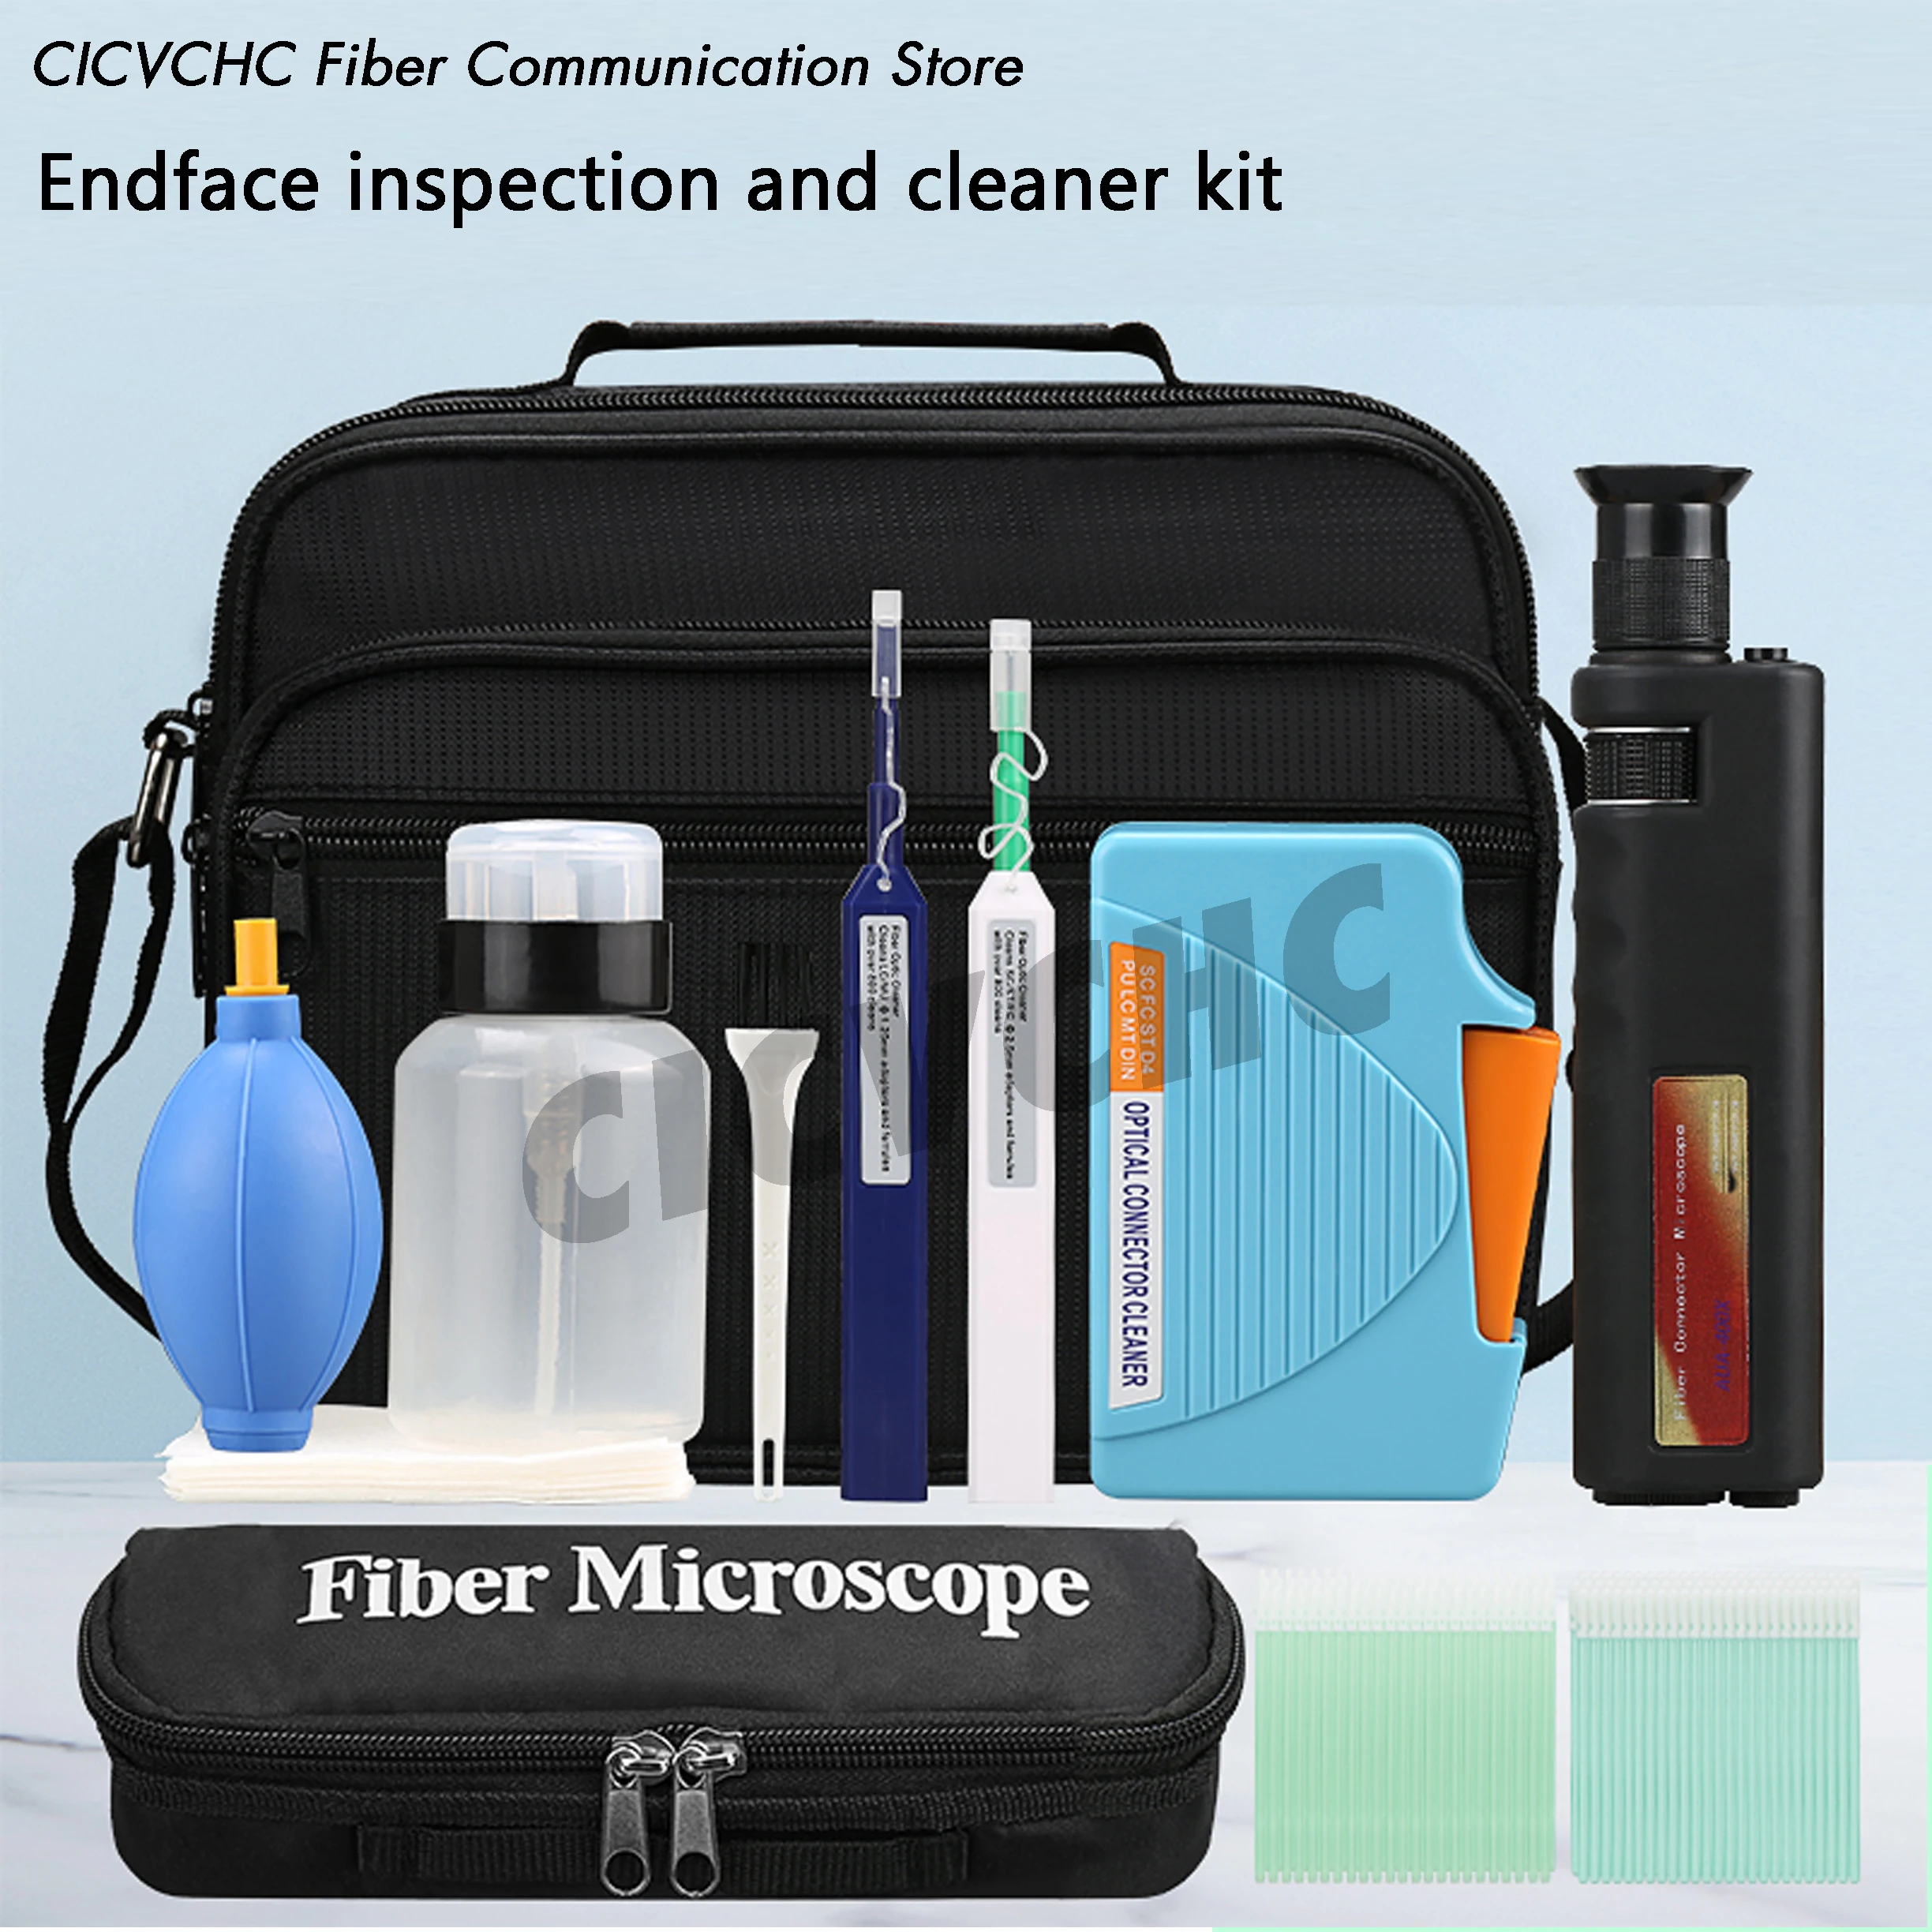 Fiber end-face inspection and cleaner tool kit with 400x fiber microscope (Hand held)